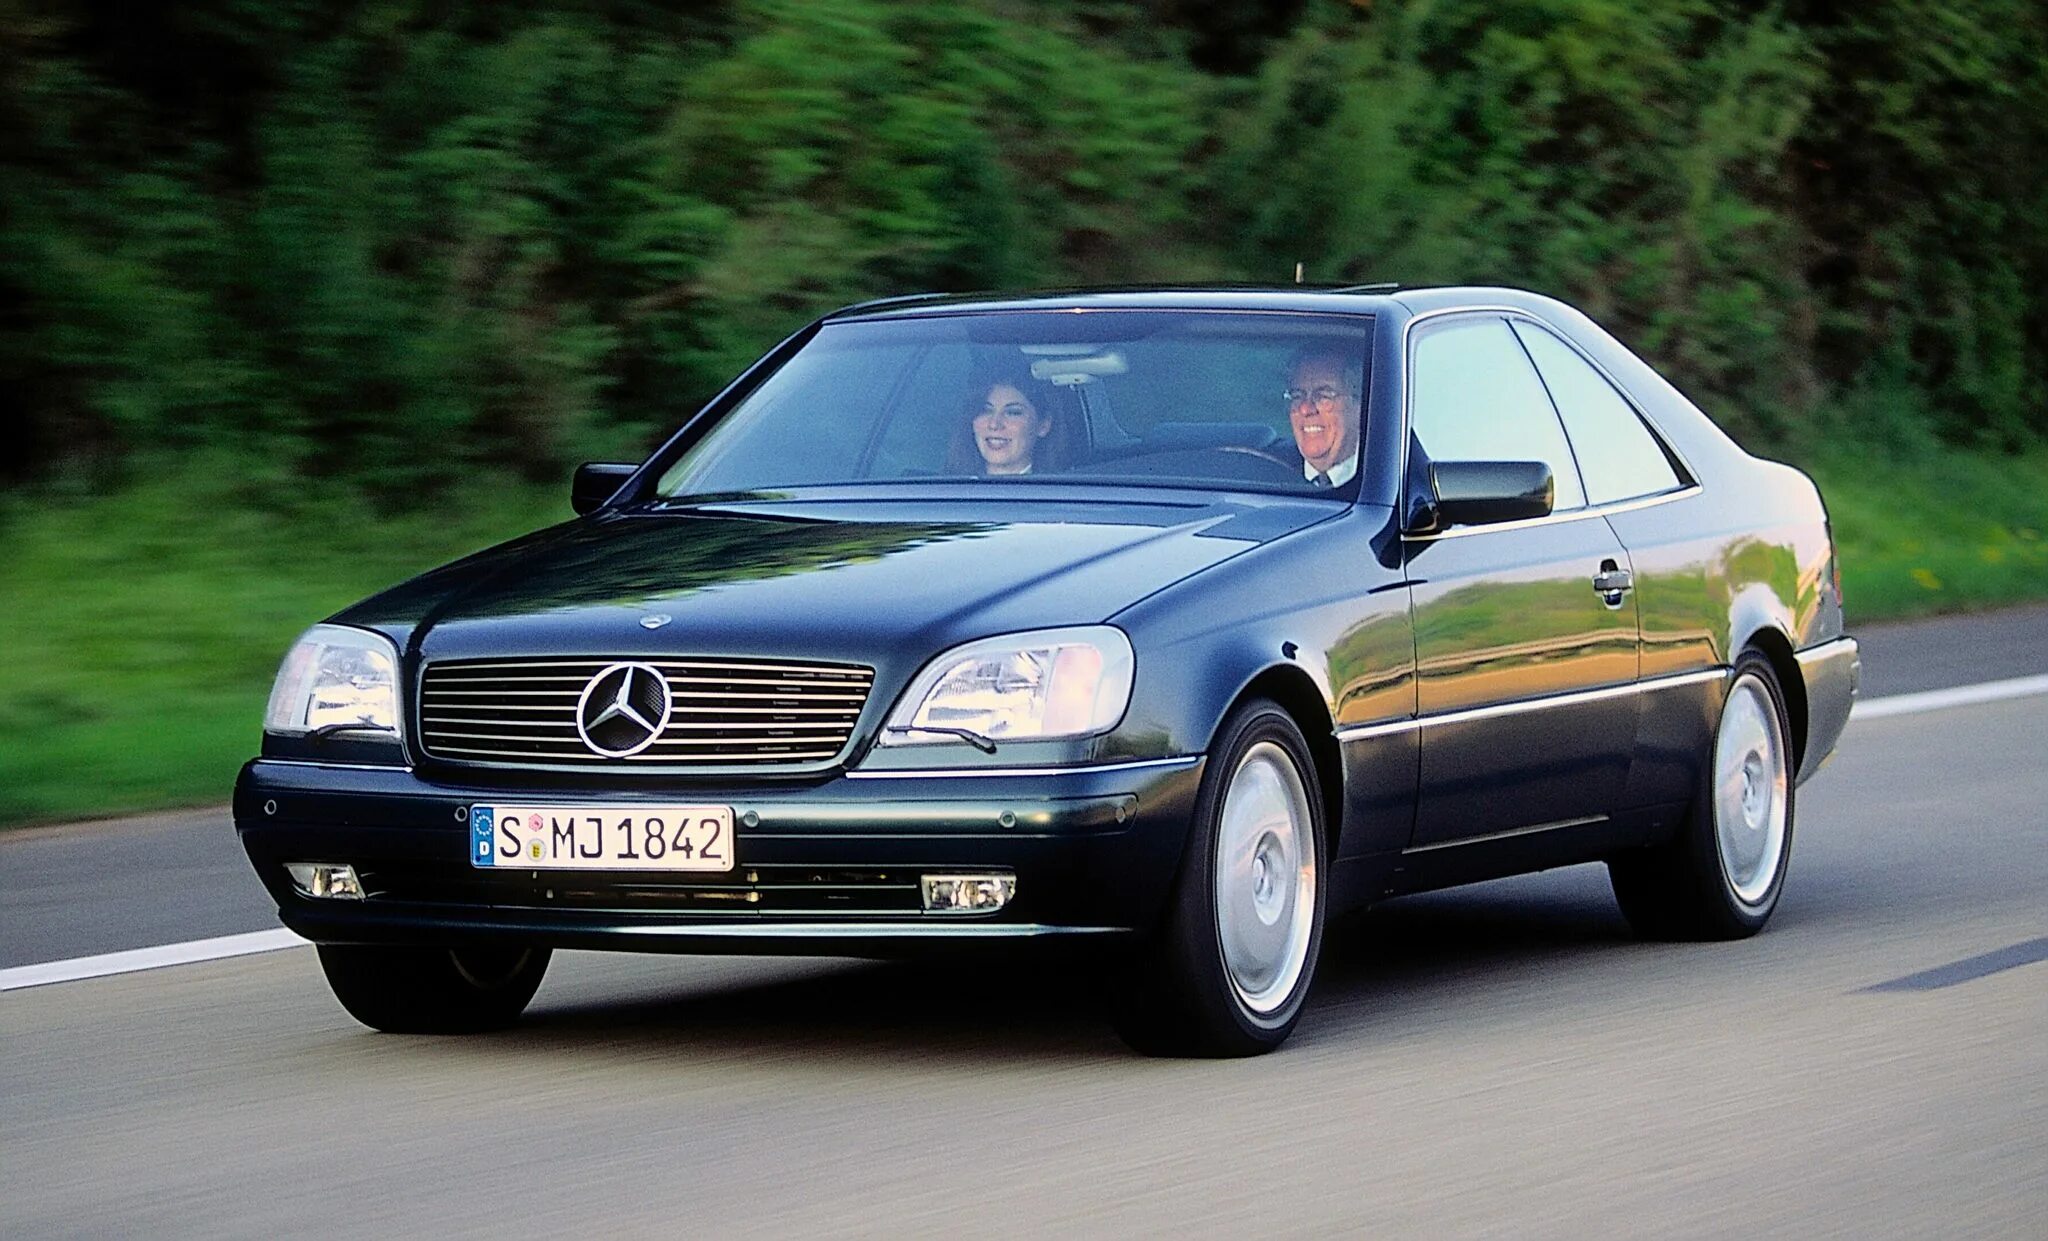 Mercedes Benz s600 Coupe c140. Мерседес w140 купе. Mercedes Benz CL 600 c140. Мерседес Бенц c140 cl600.